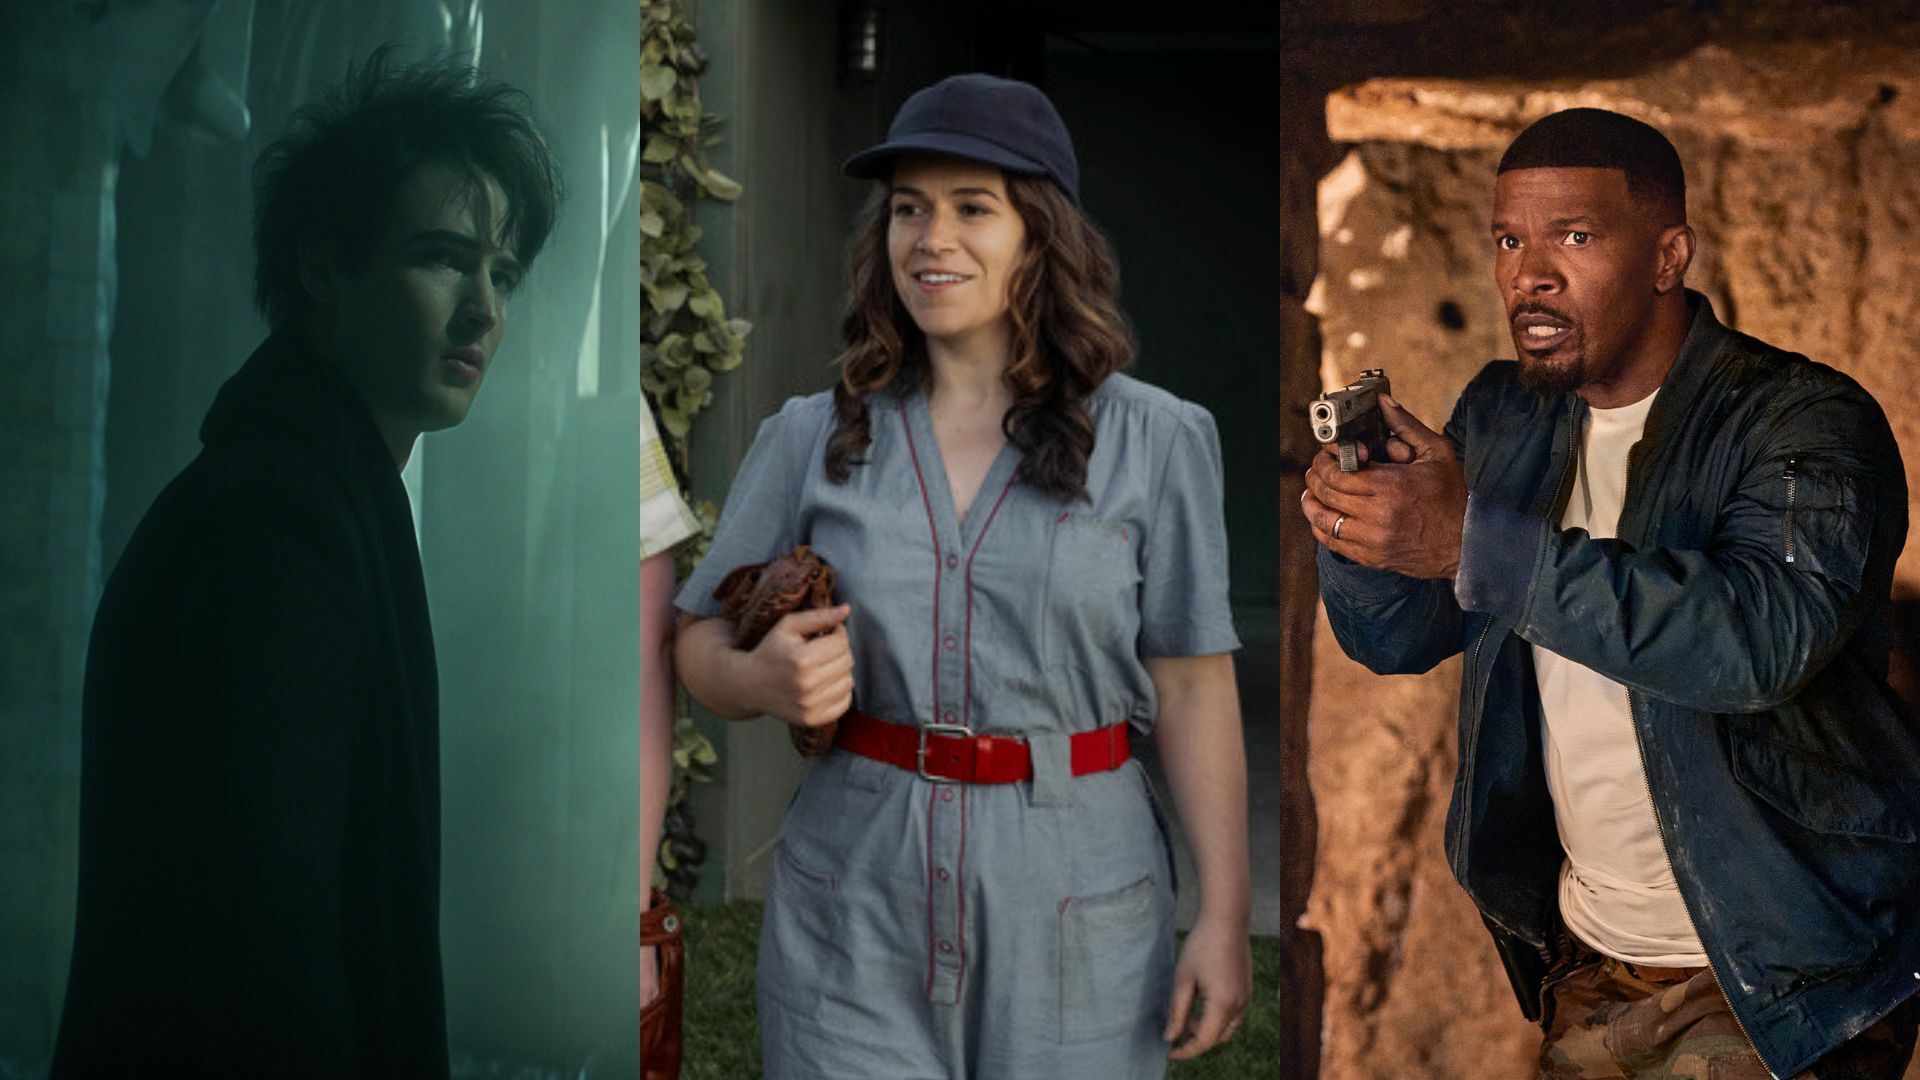 Three images from different TV shows and movies, showing a man in a black coat, a baseball player, and a man with a gun.